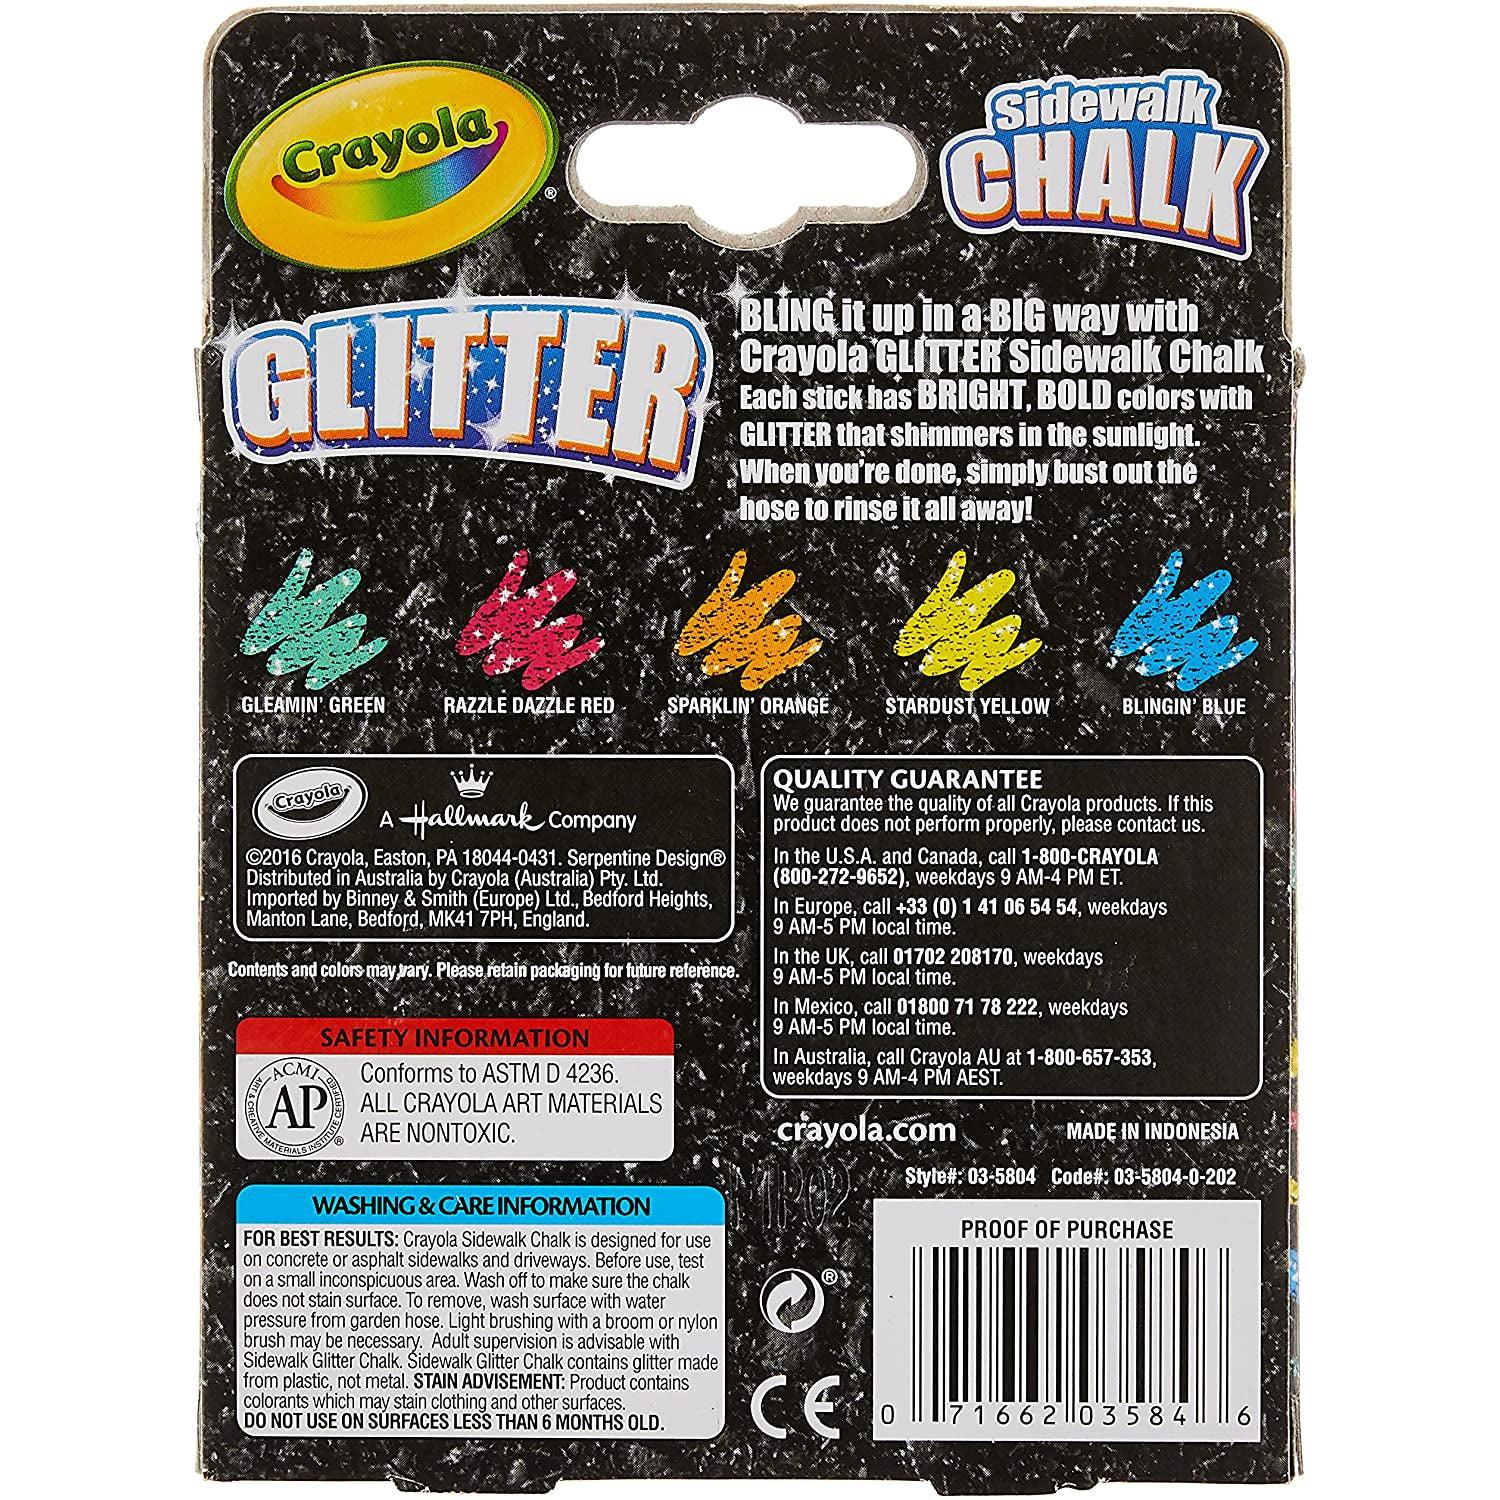 Front view of the box of Crayon Glitter Sidewalk Chalk.